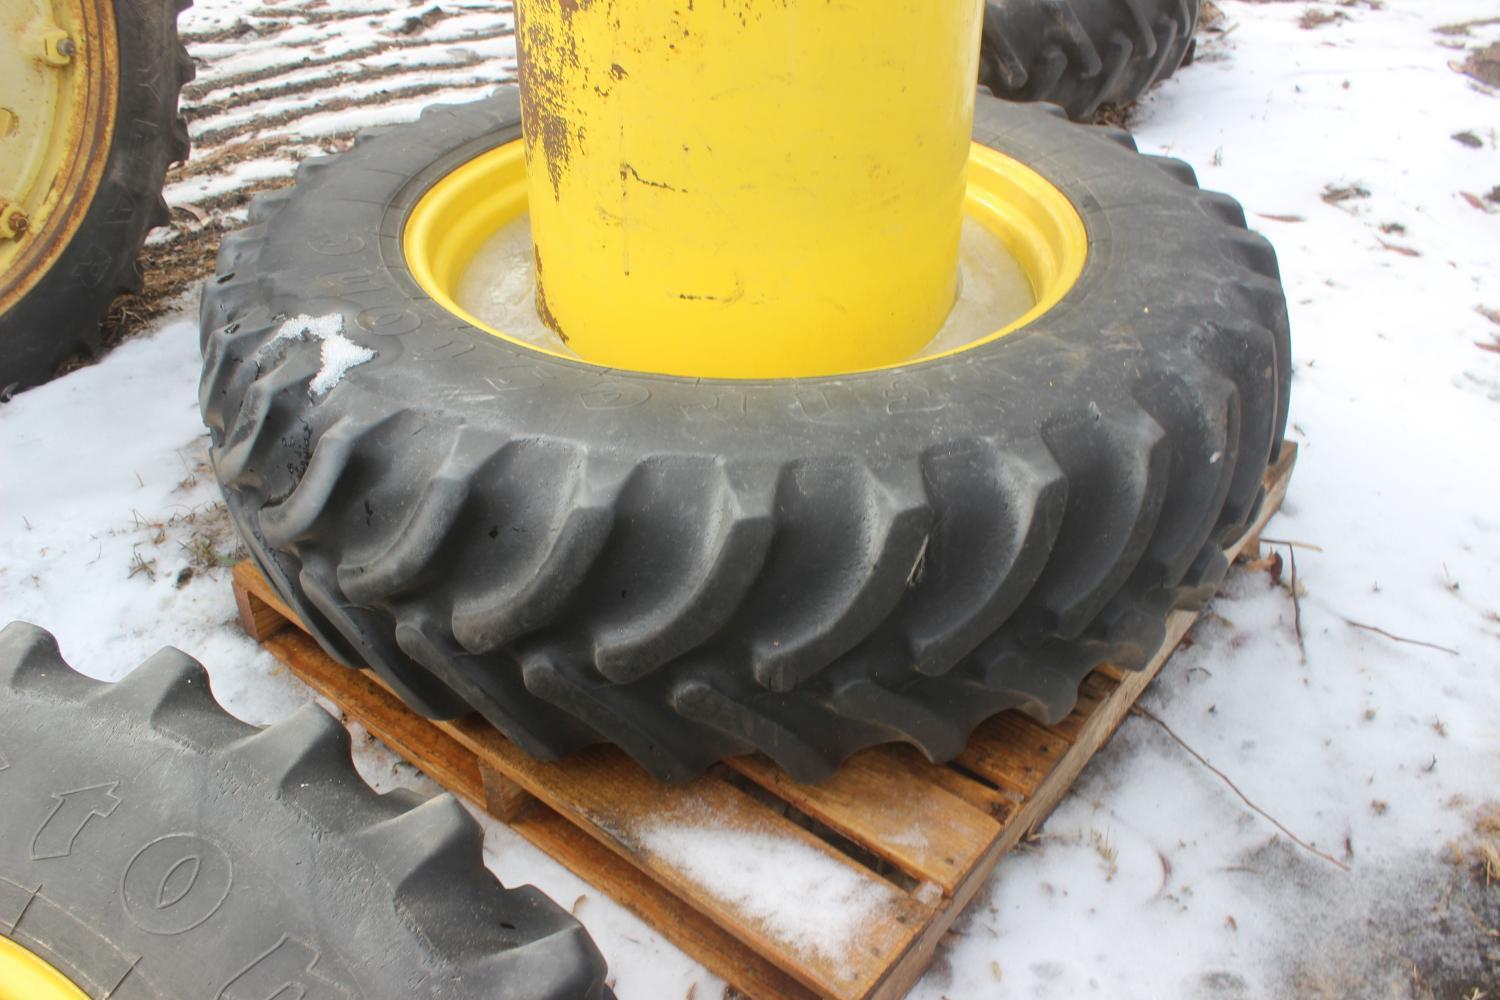 Firestone 14.9R34 Front Duals For 8000 Series Tractor.